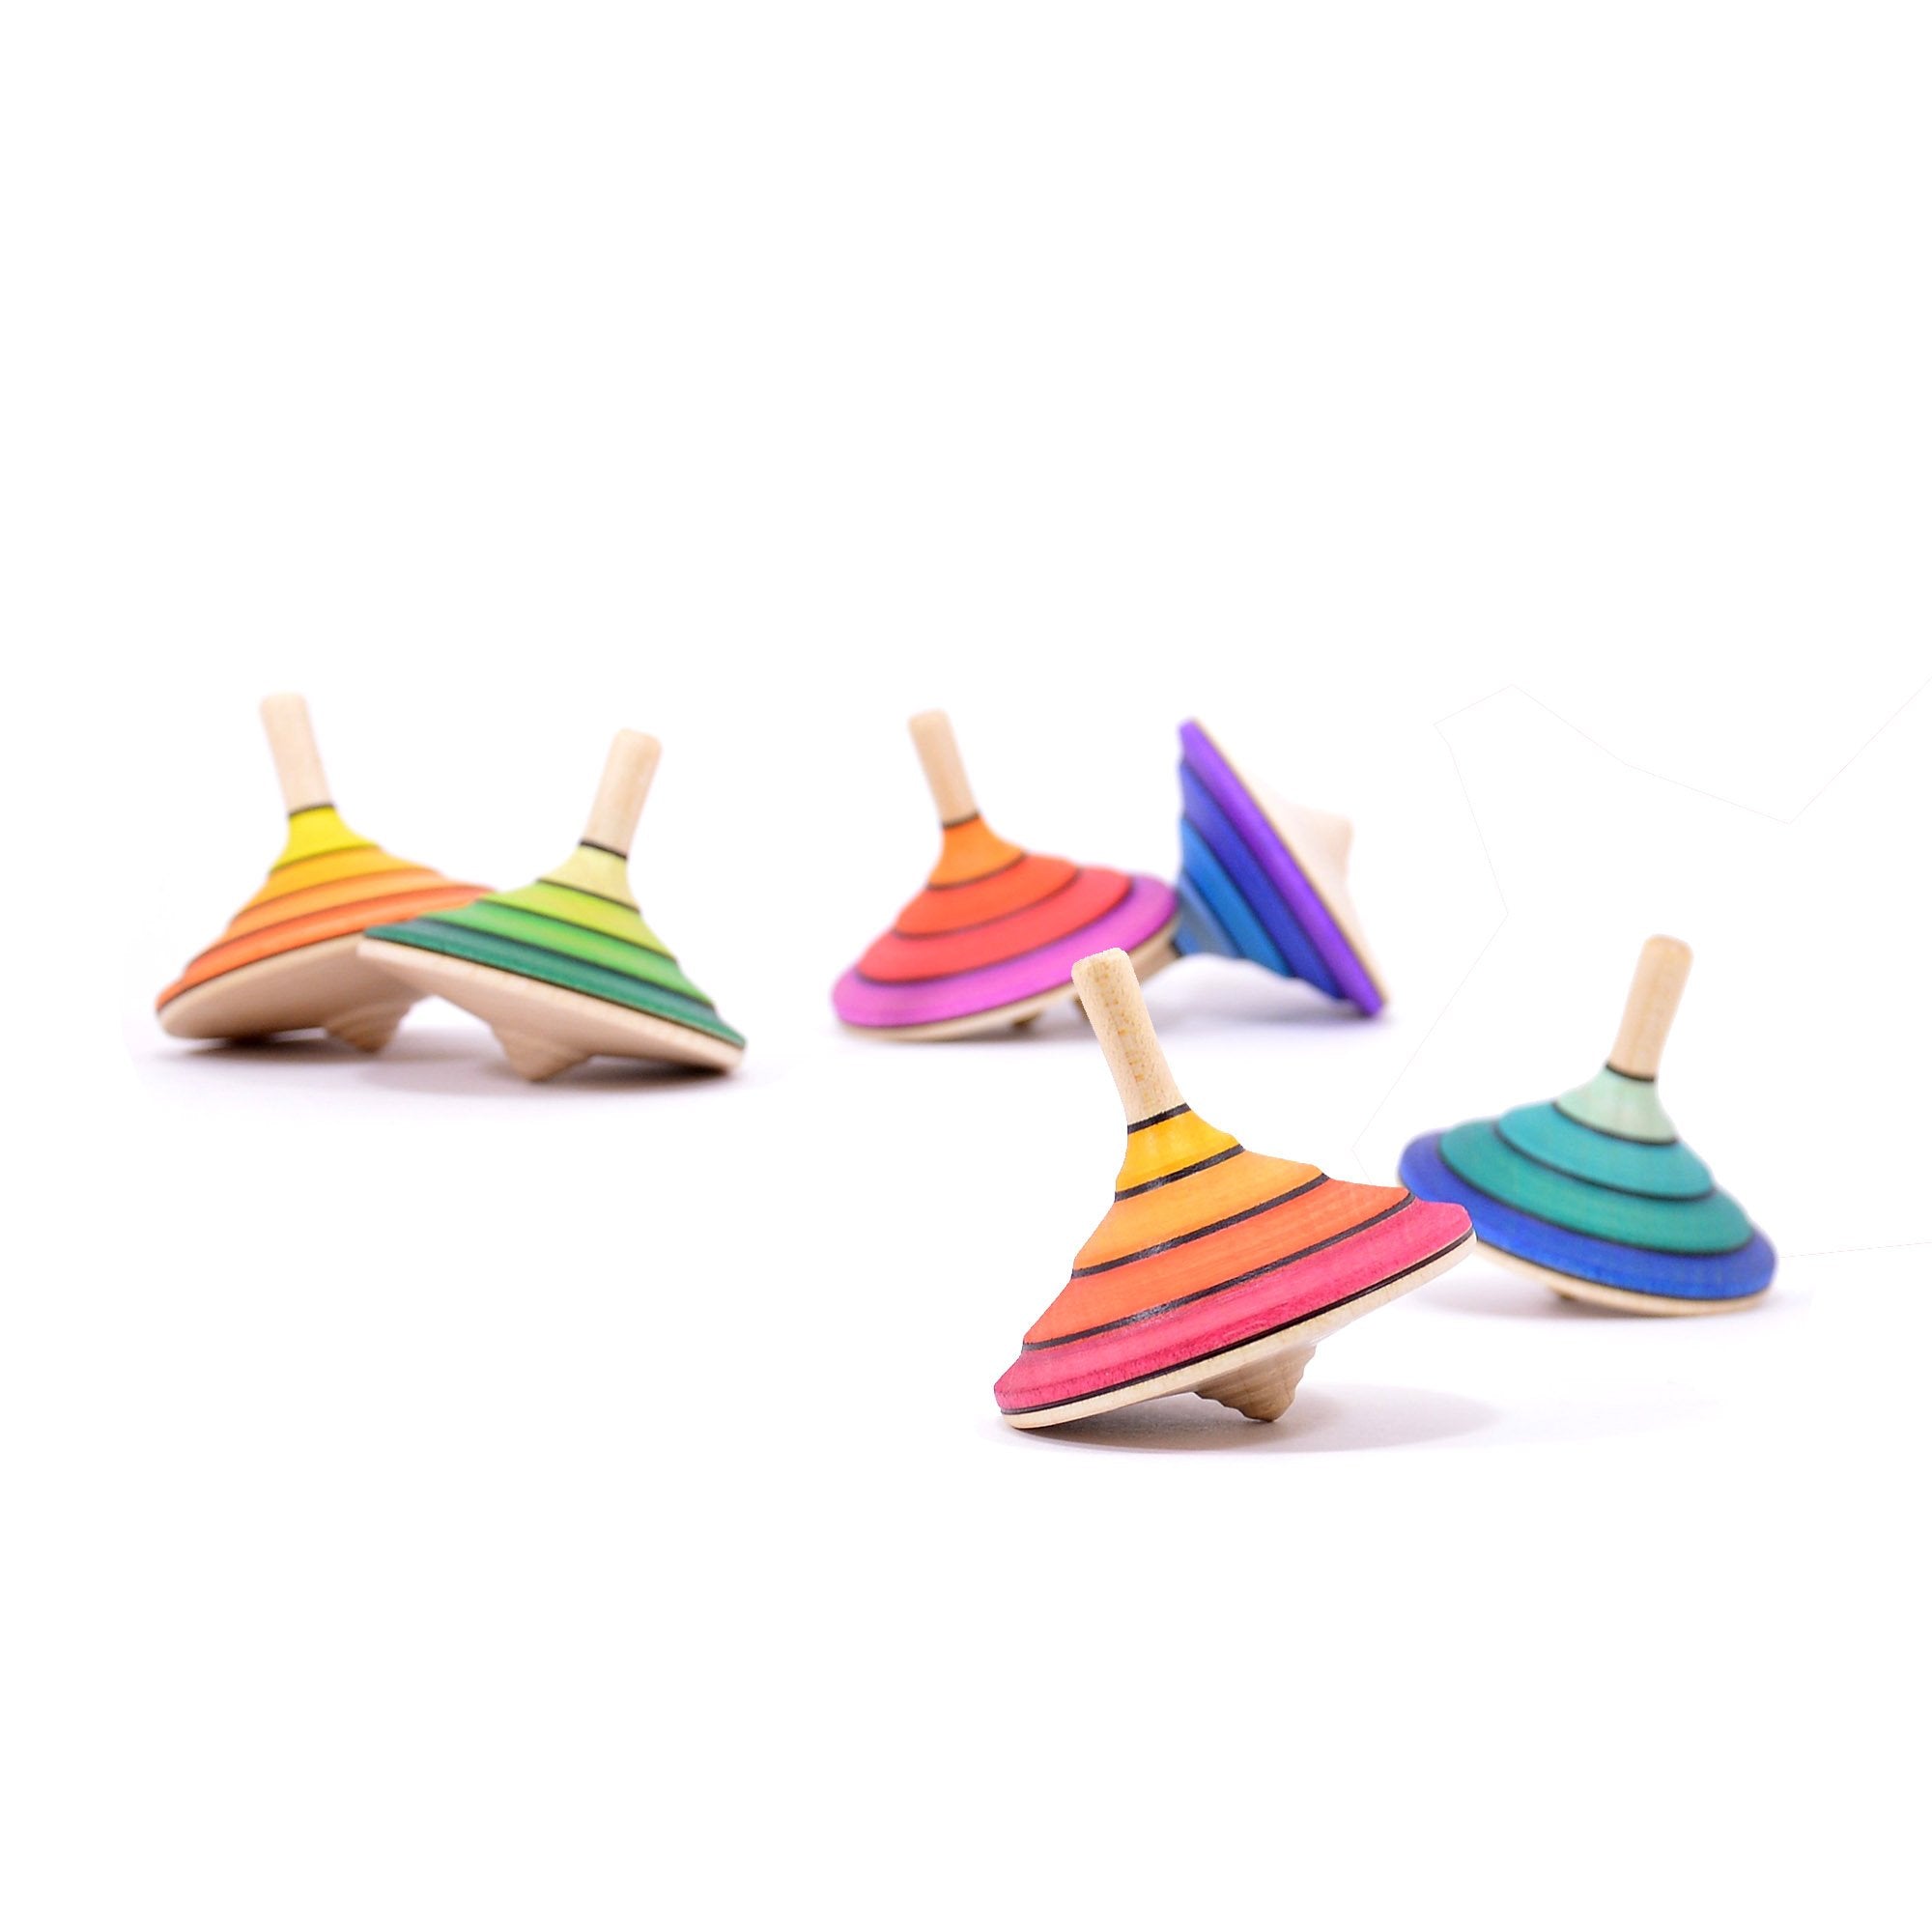 Mader | Flamenco Spinning Top